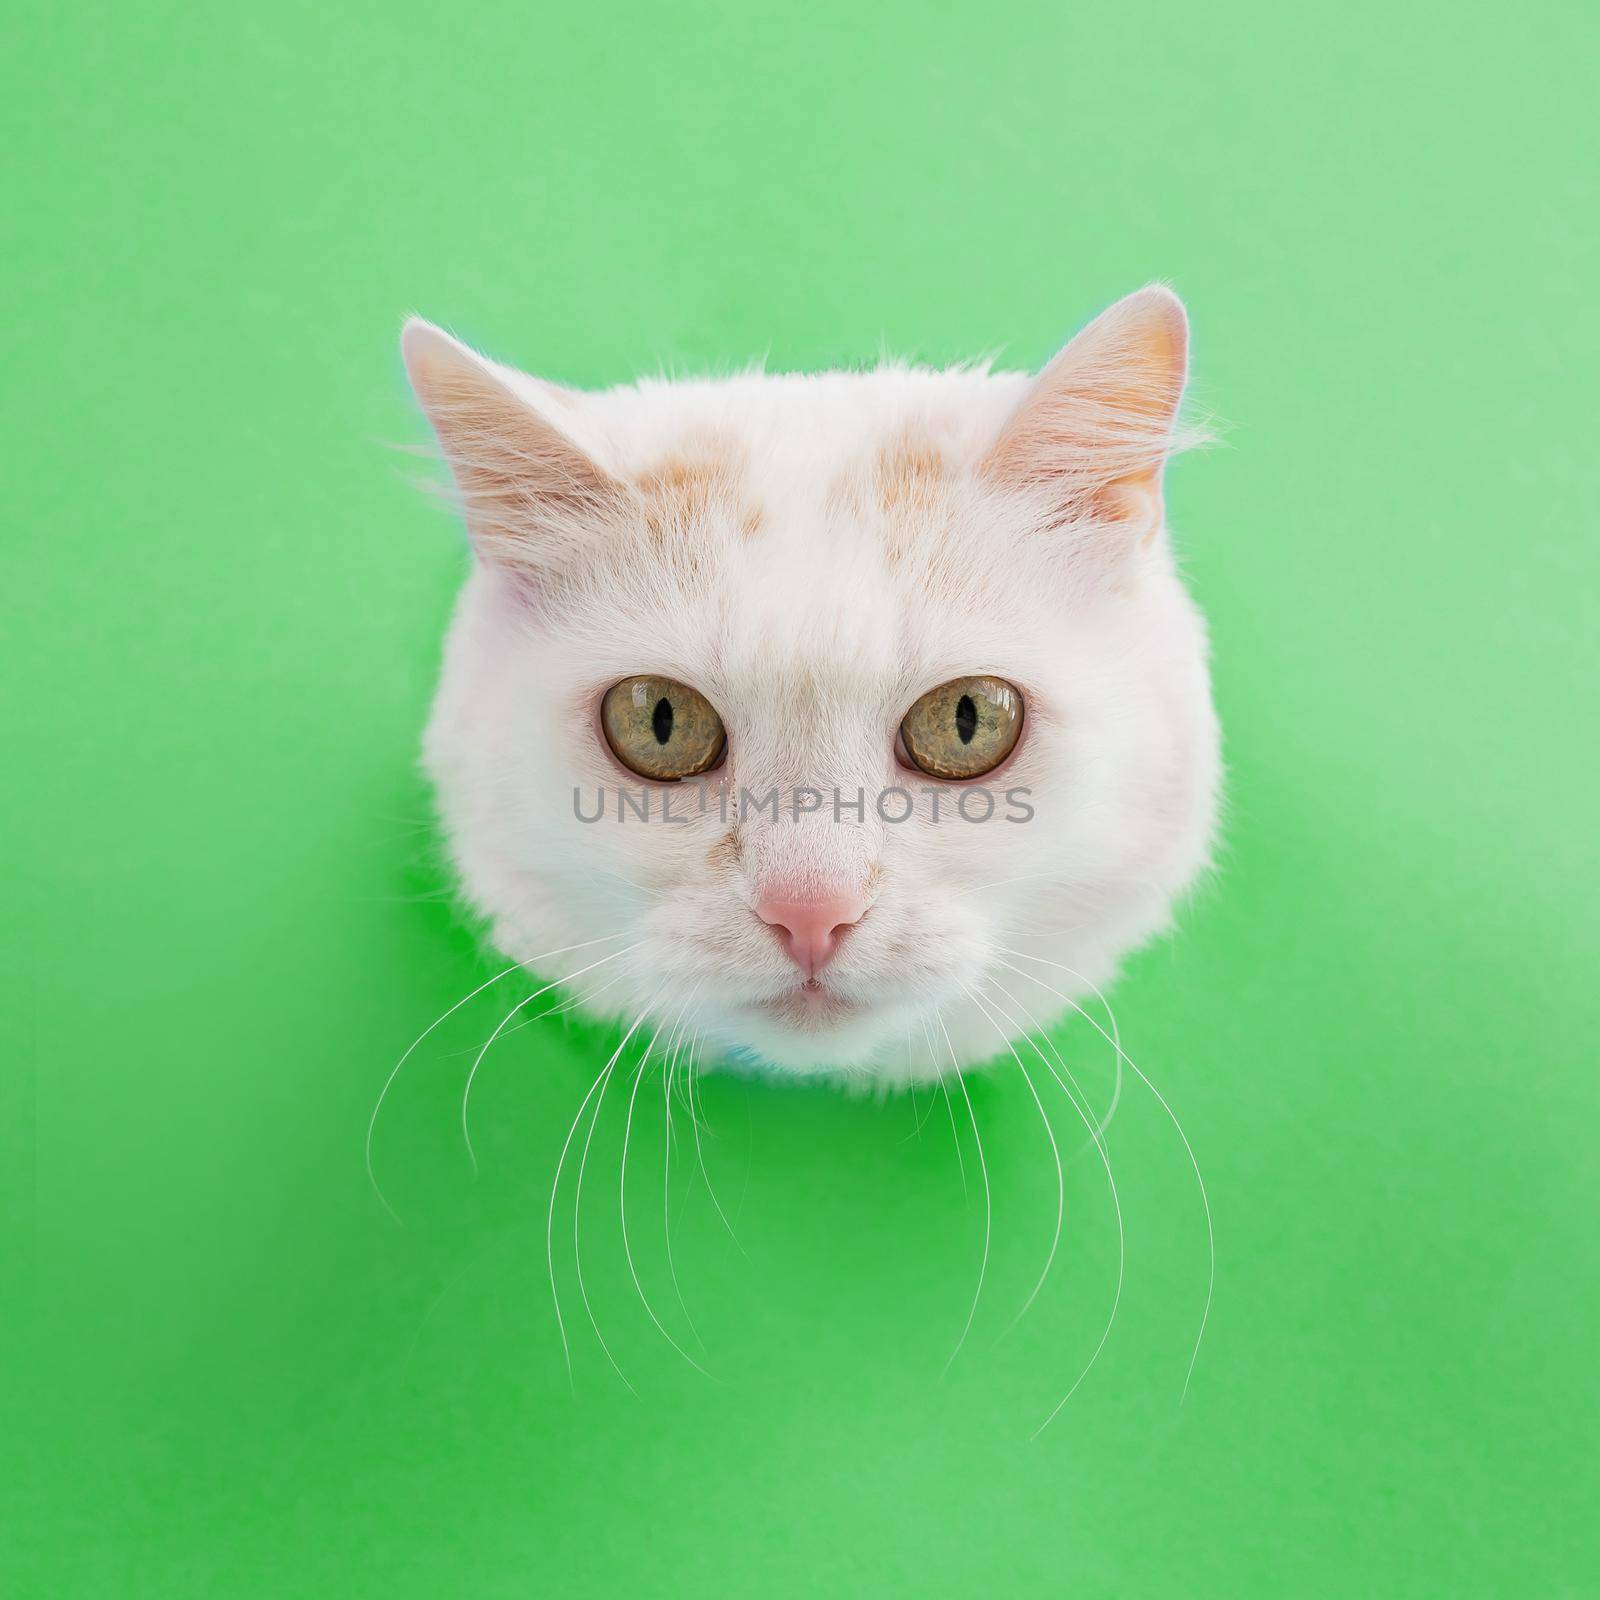 The muzzle of a white fluffy cat peeking out of a hole in green background. by mrwed54